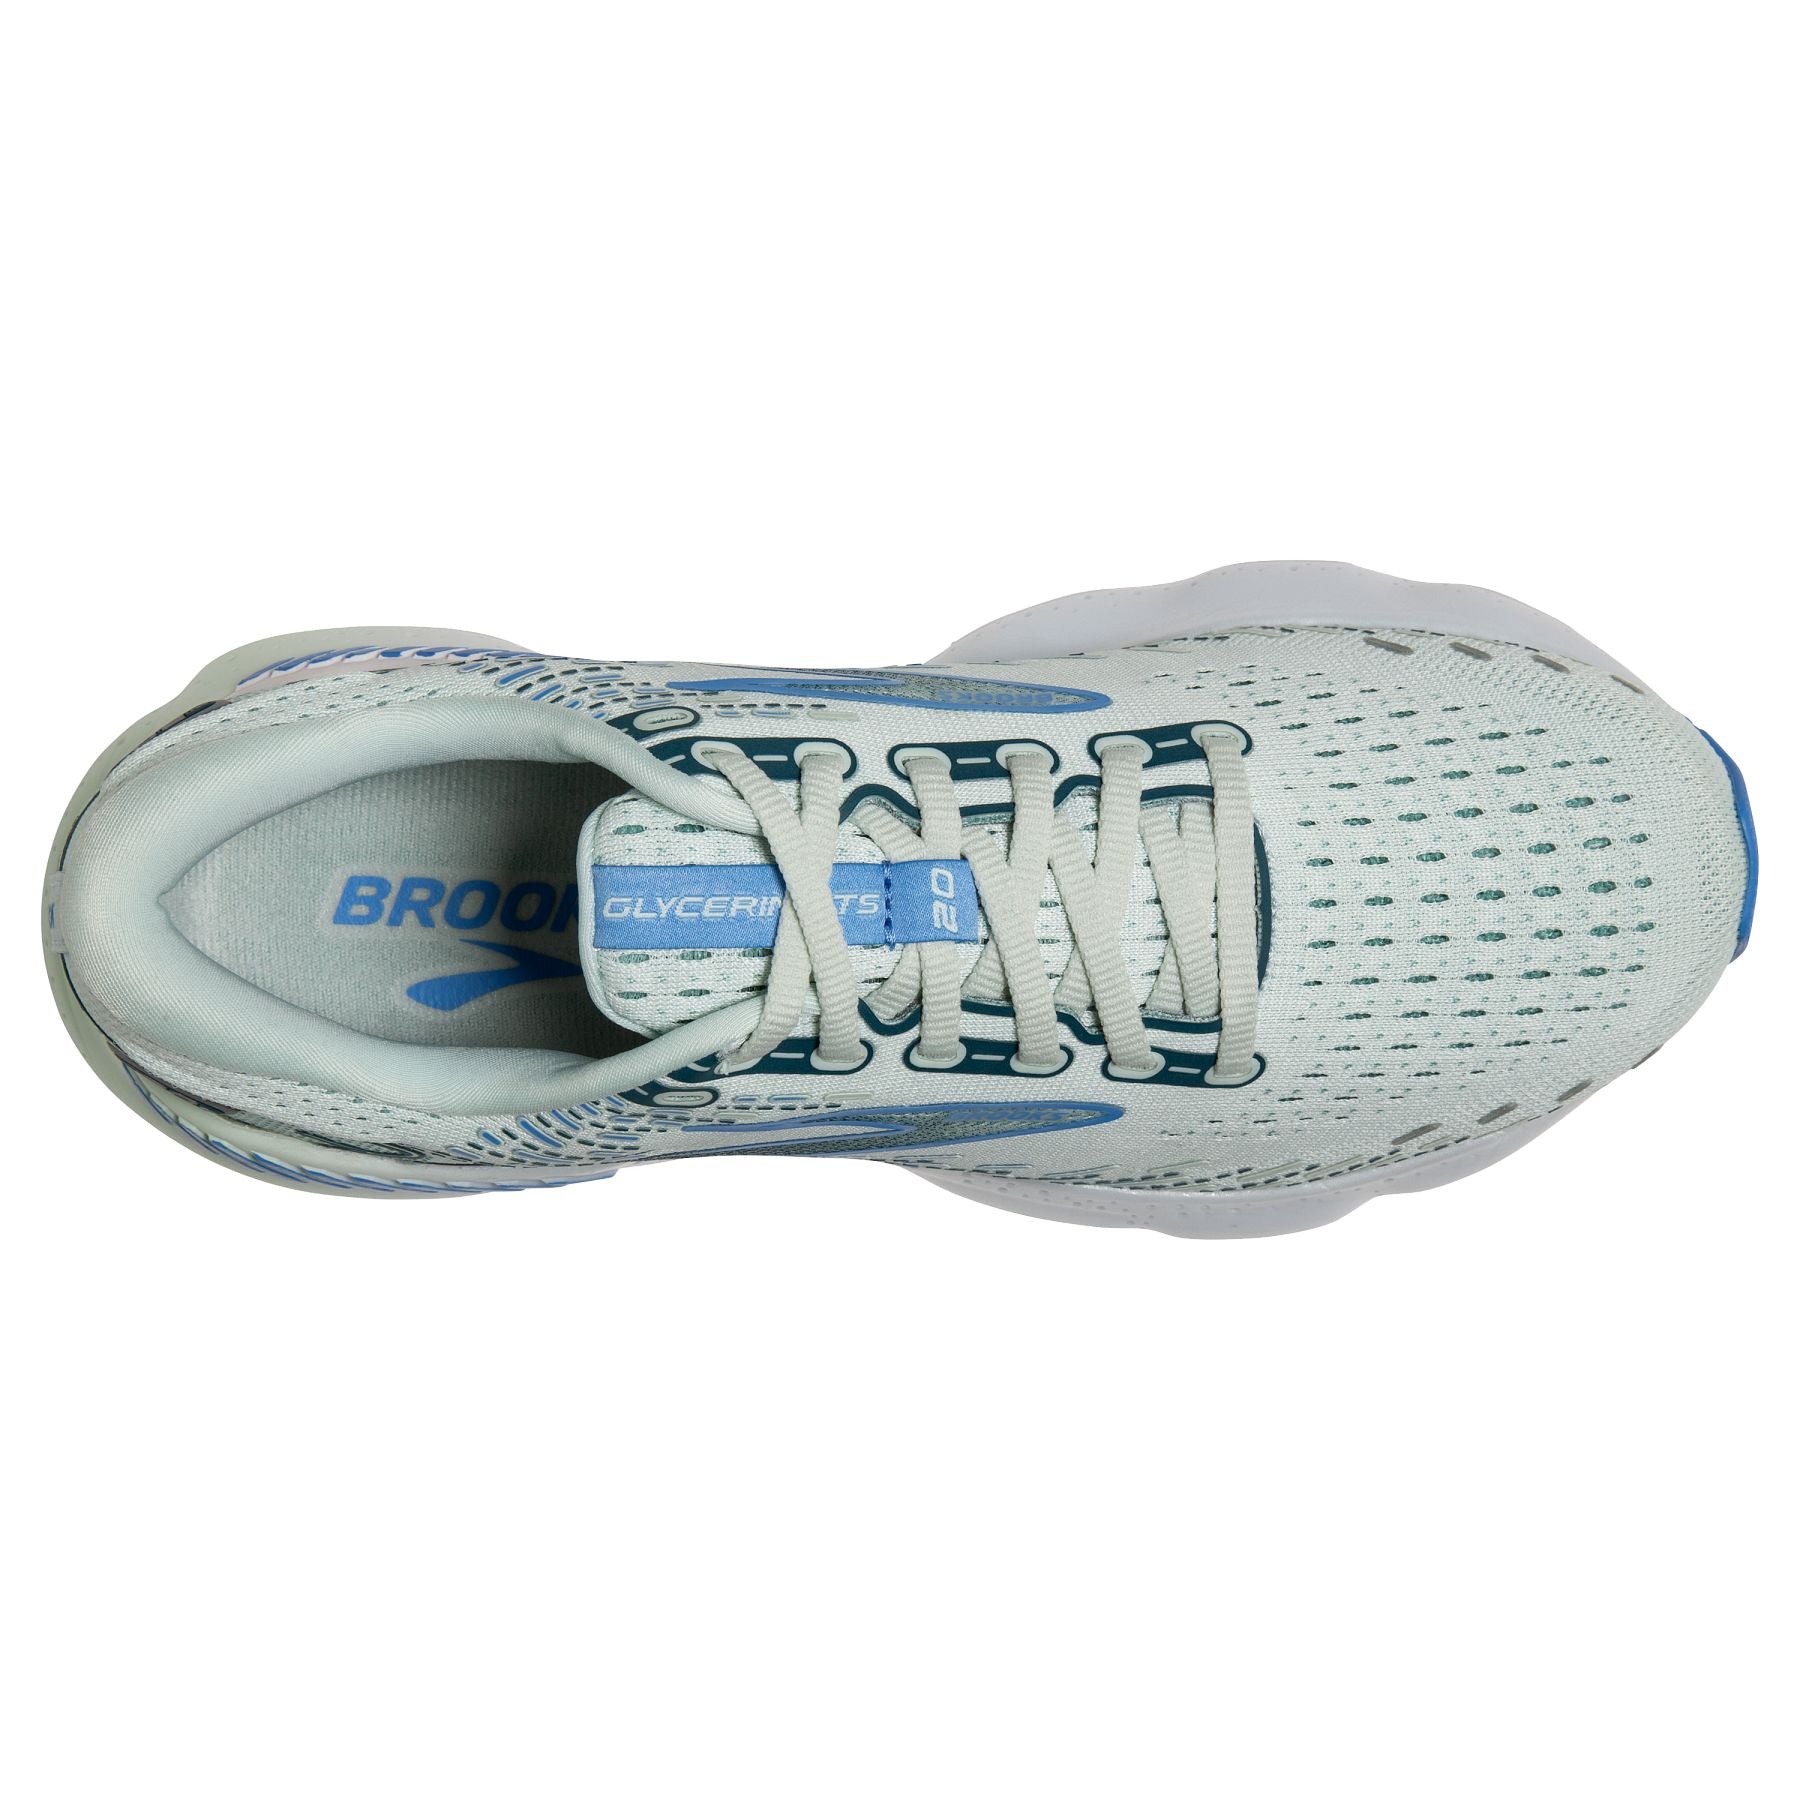 Top view of the Women's Glycerin GTS 20 in the color Blue Glass/Marina/Legion Blue